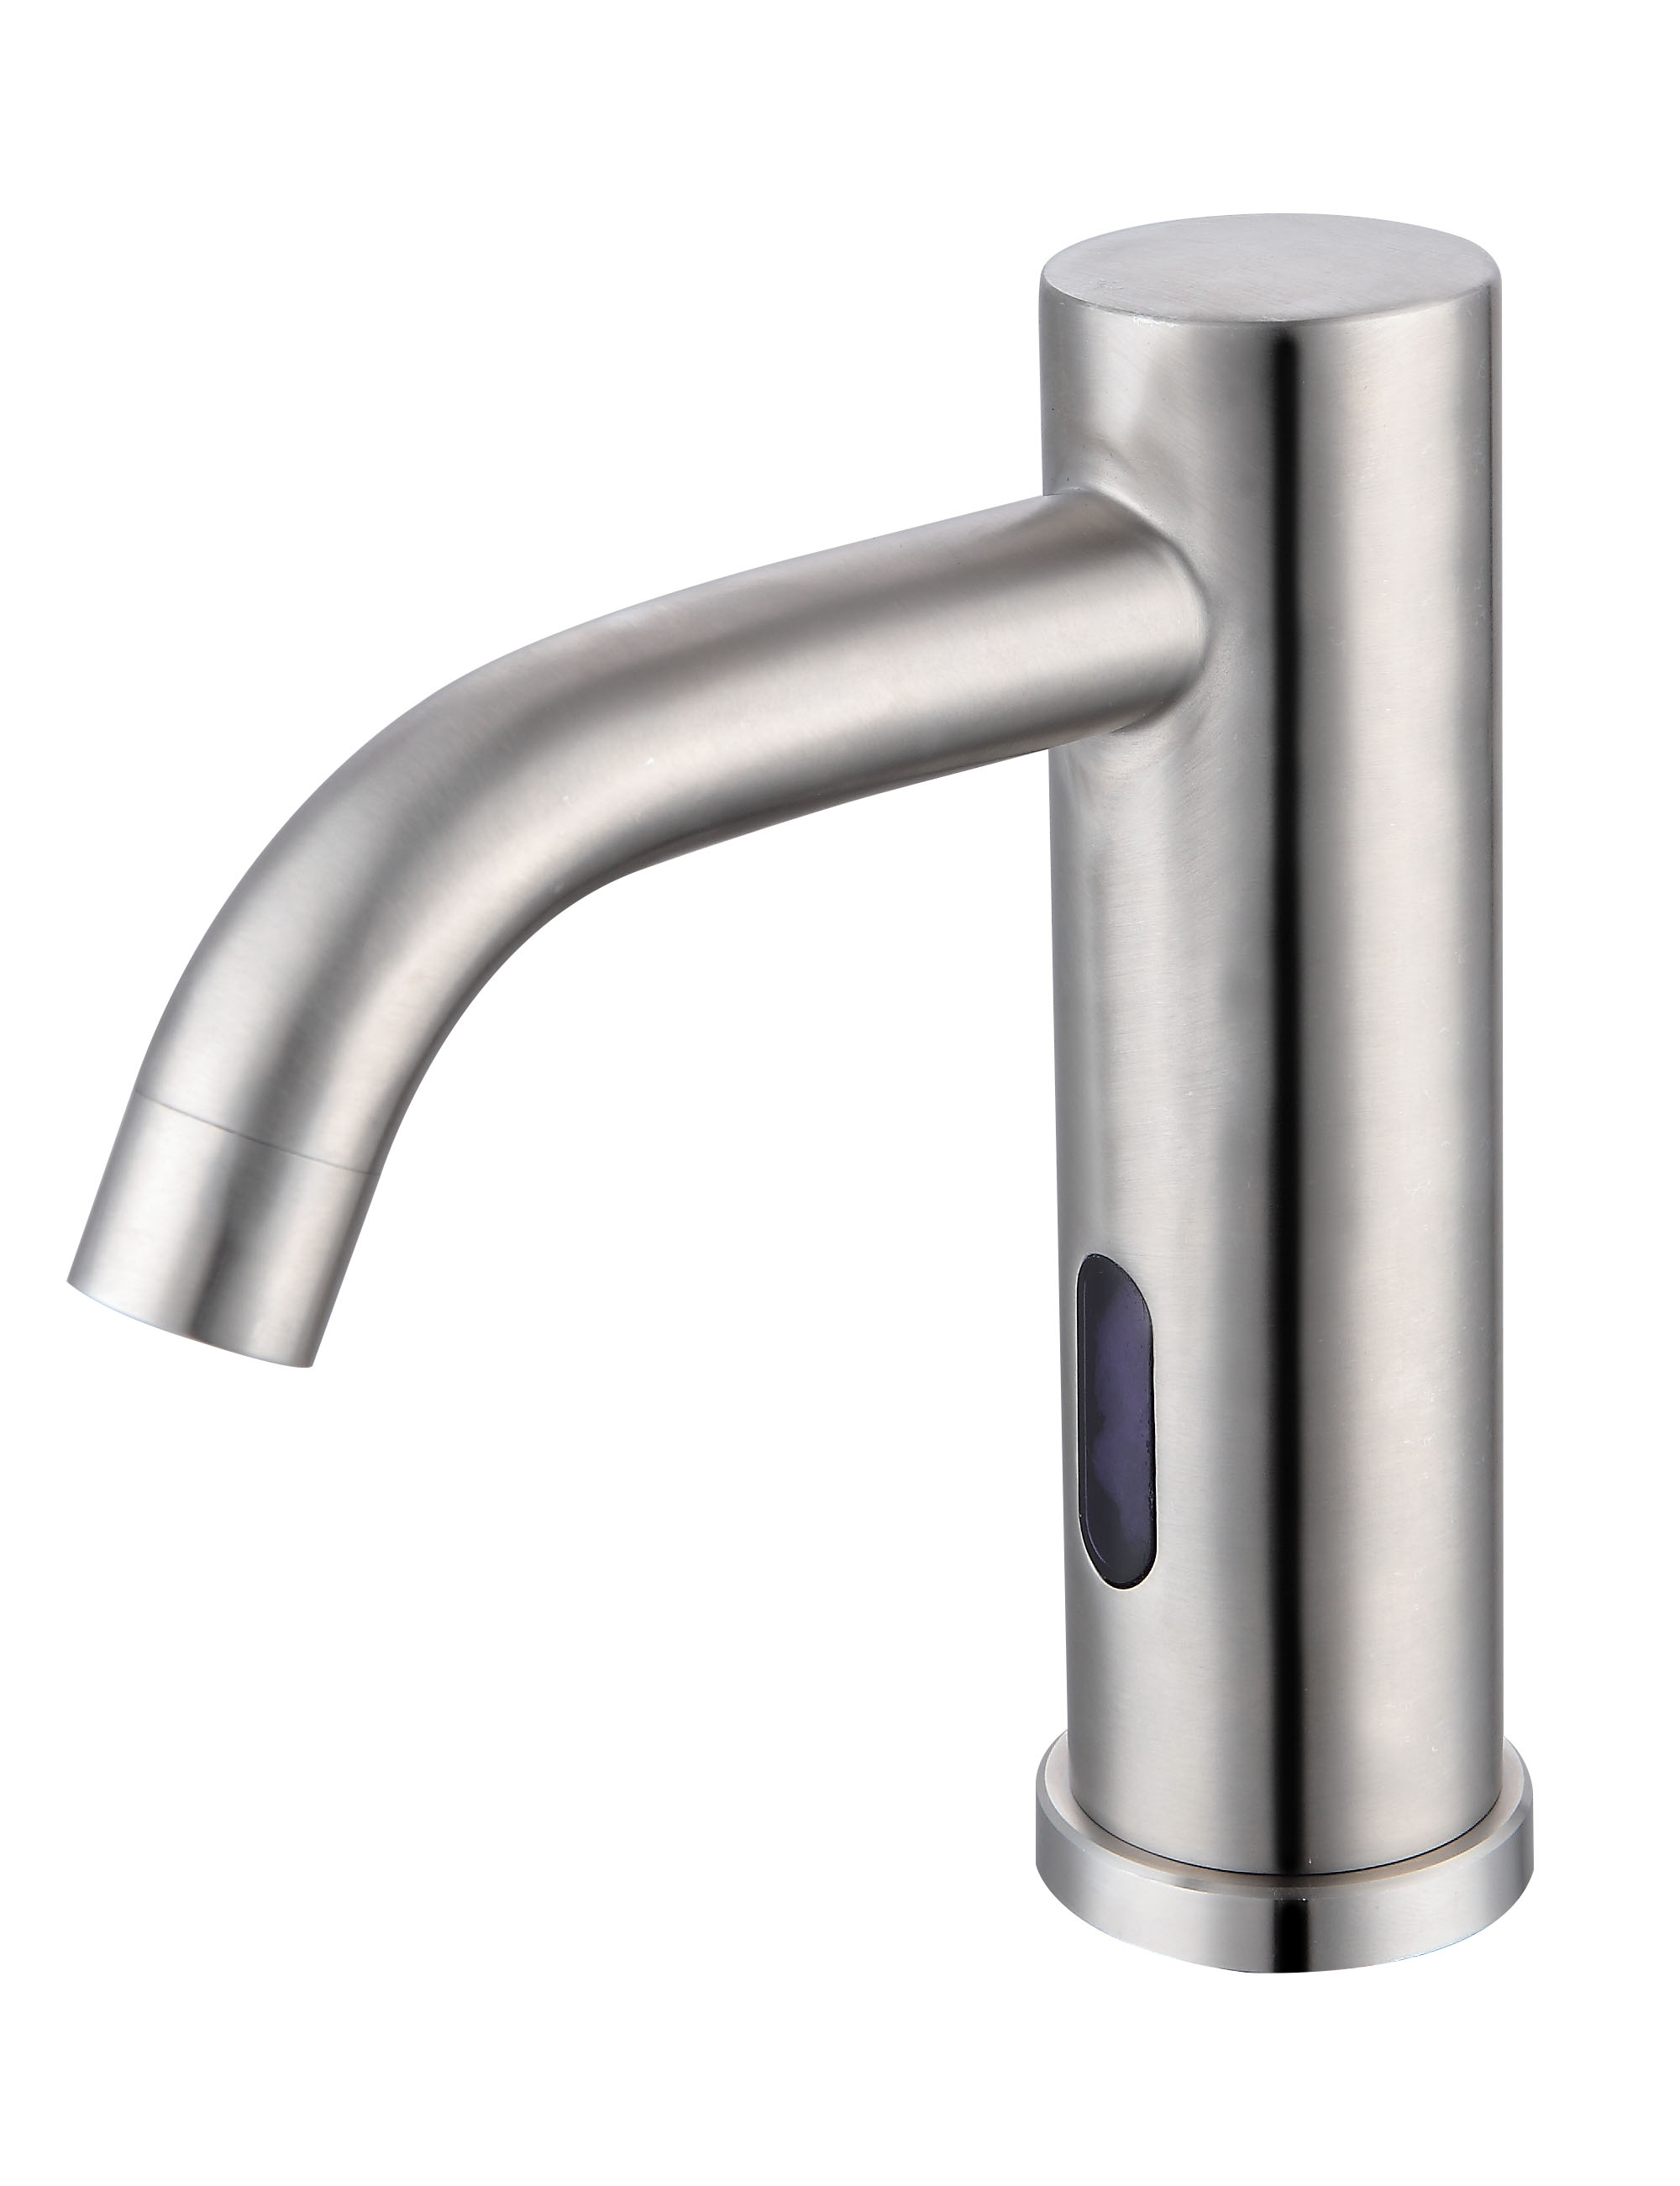 Manual for Self-powered Auto Faucet XS-5032